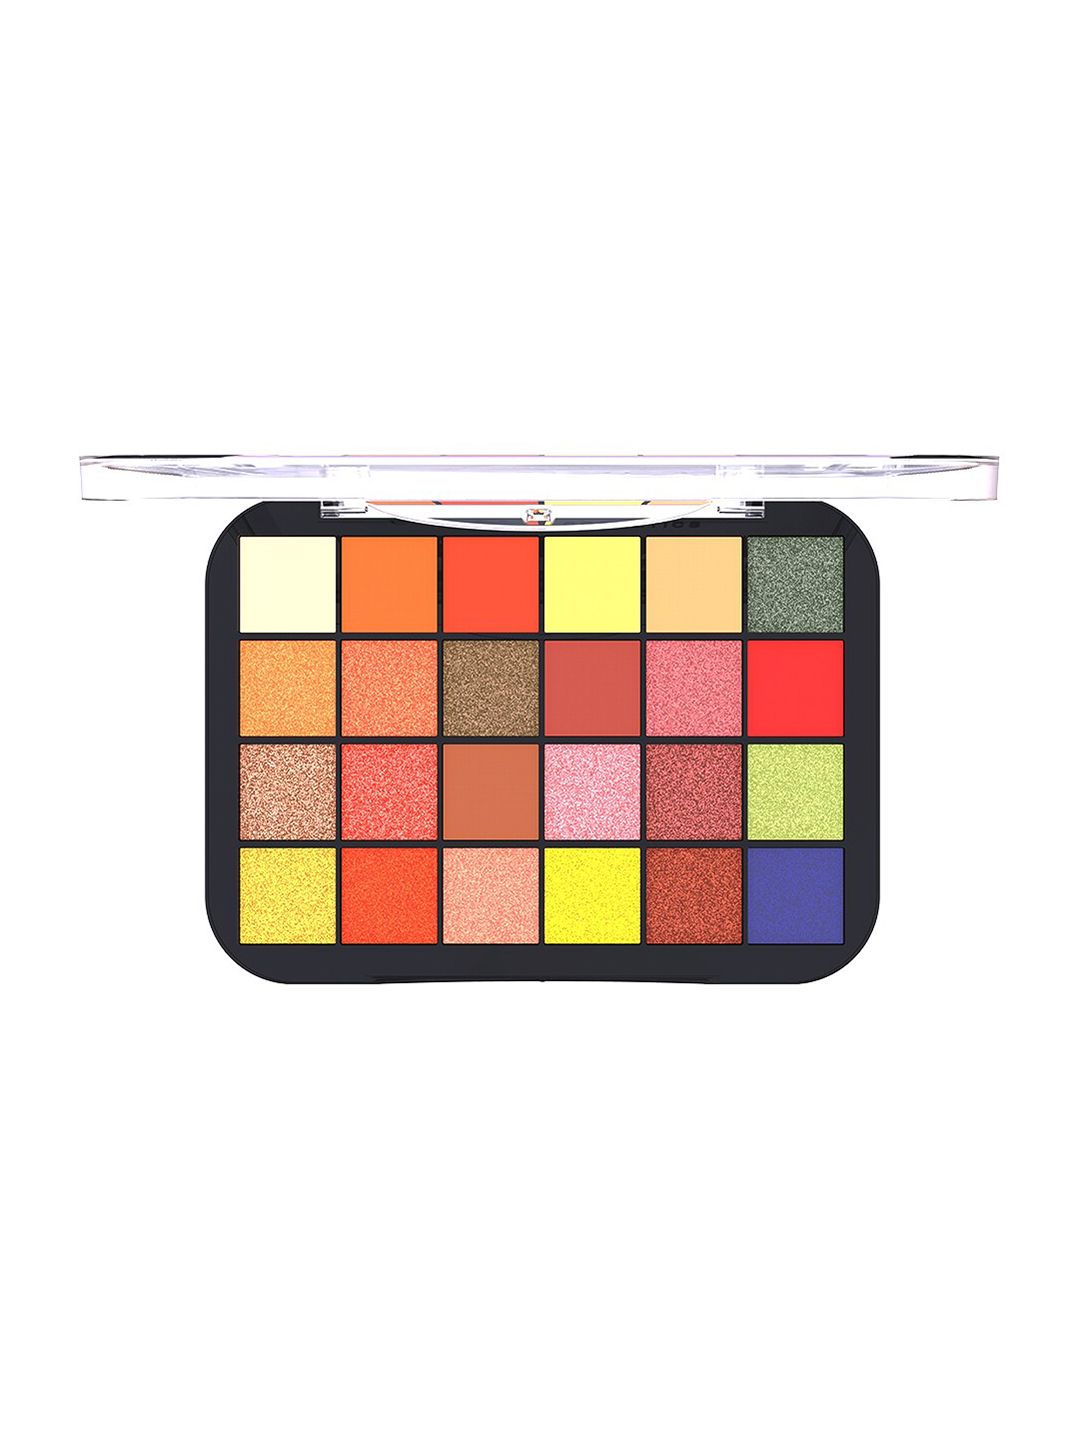 SHRYOAN Women The Ultimate Pro Eyeshadow Palette Price in India